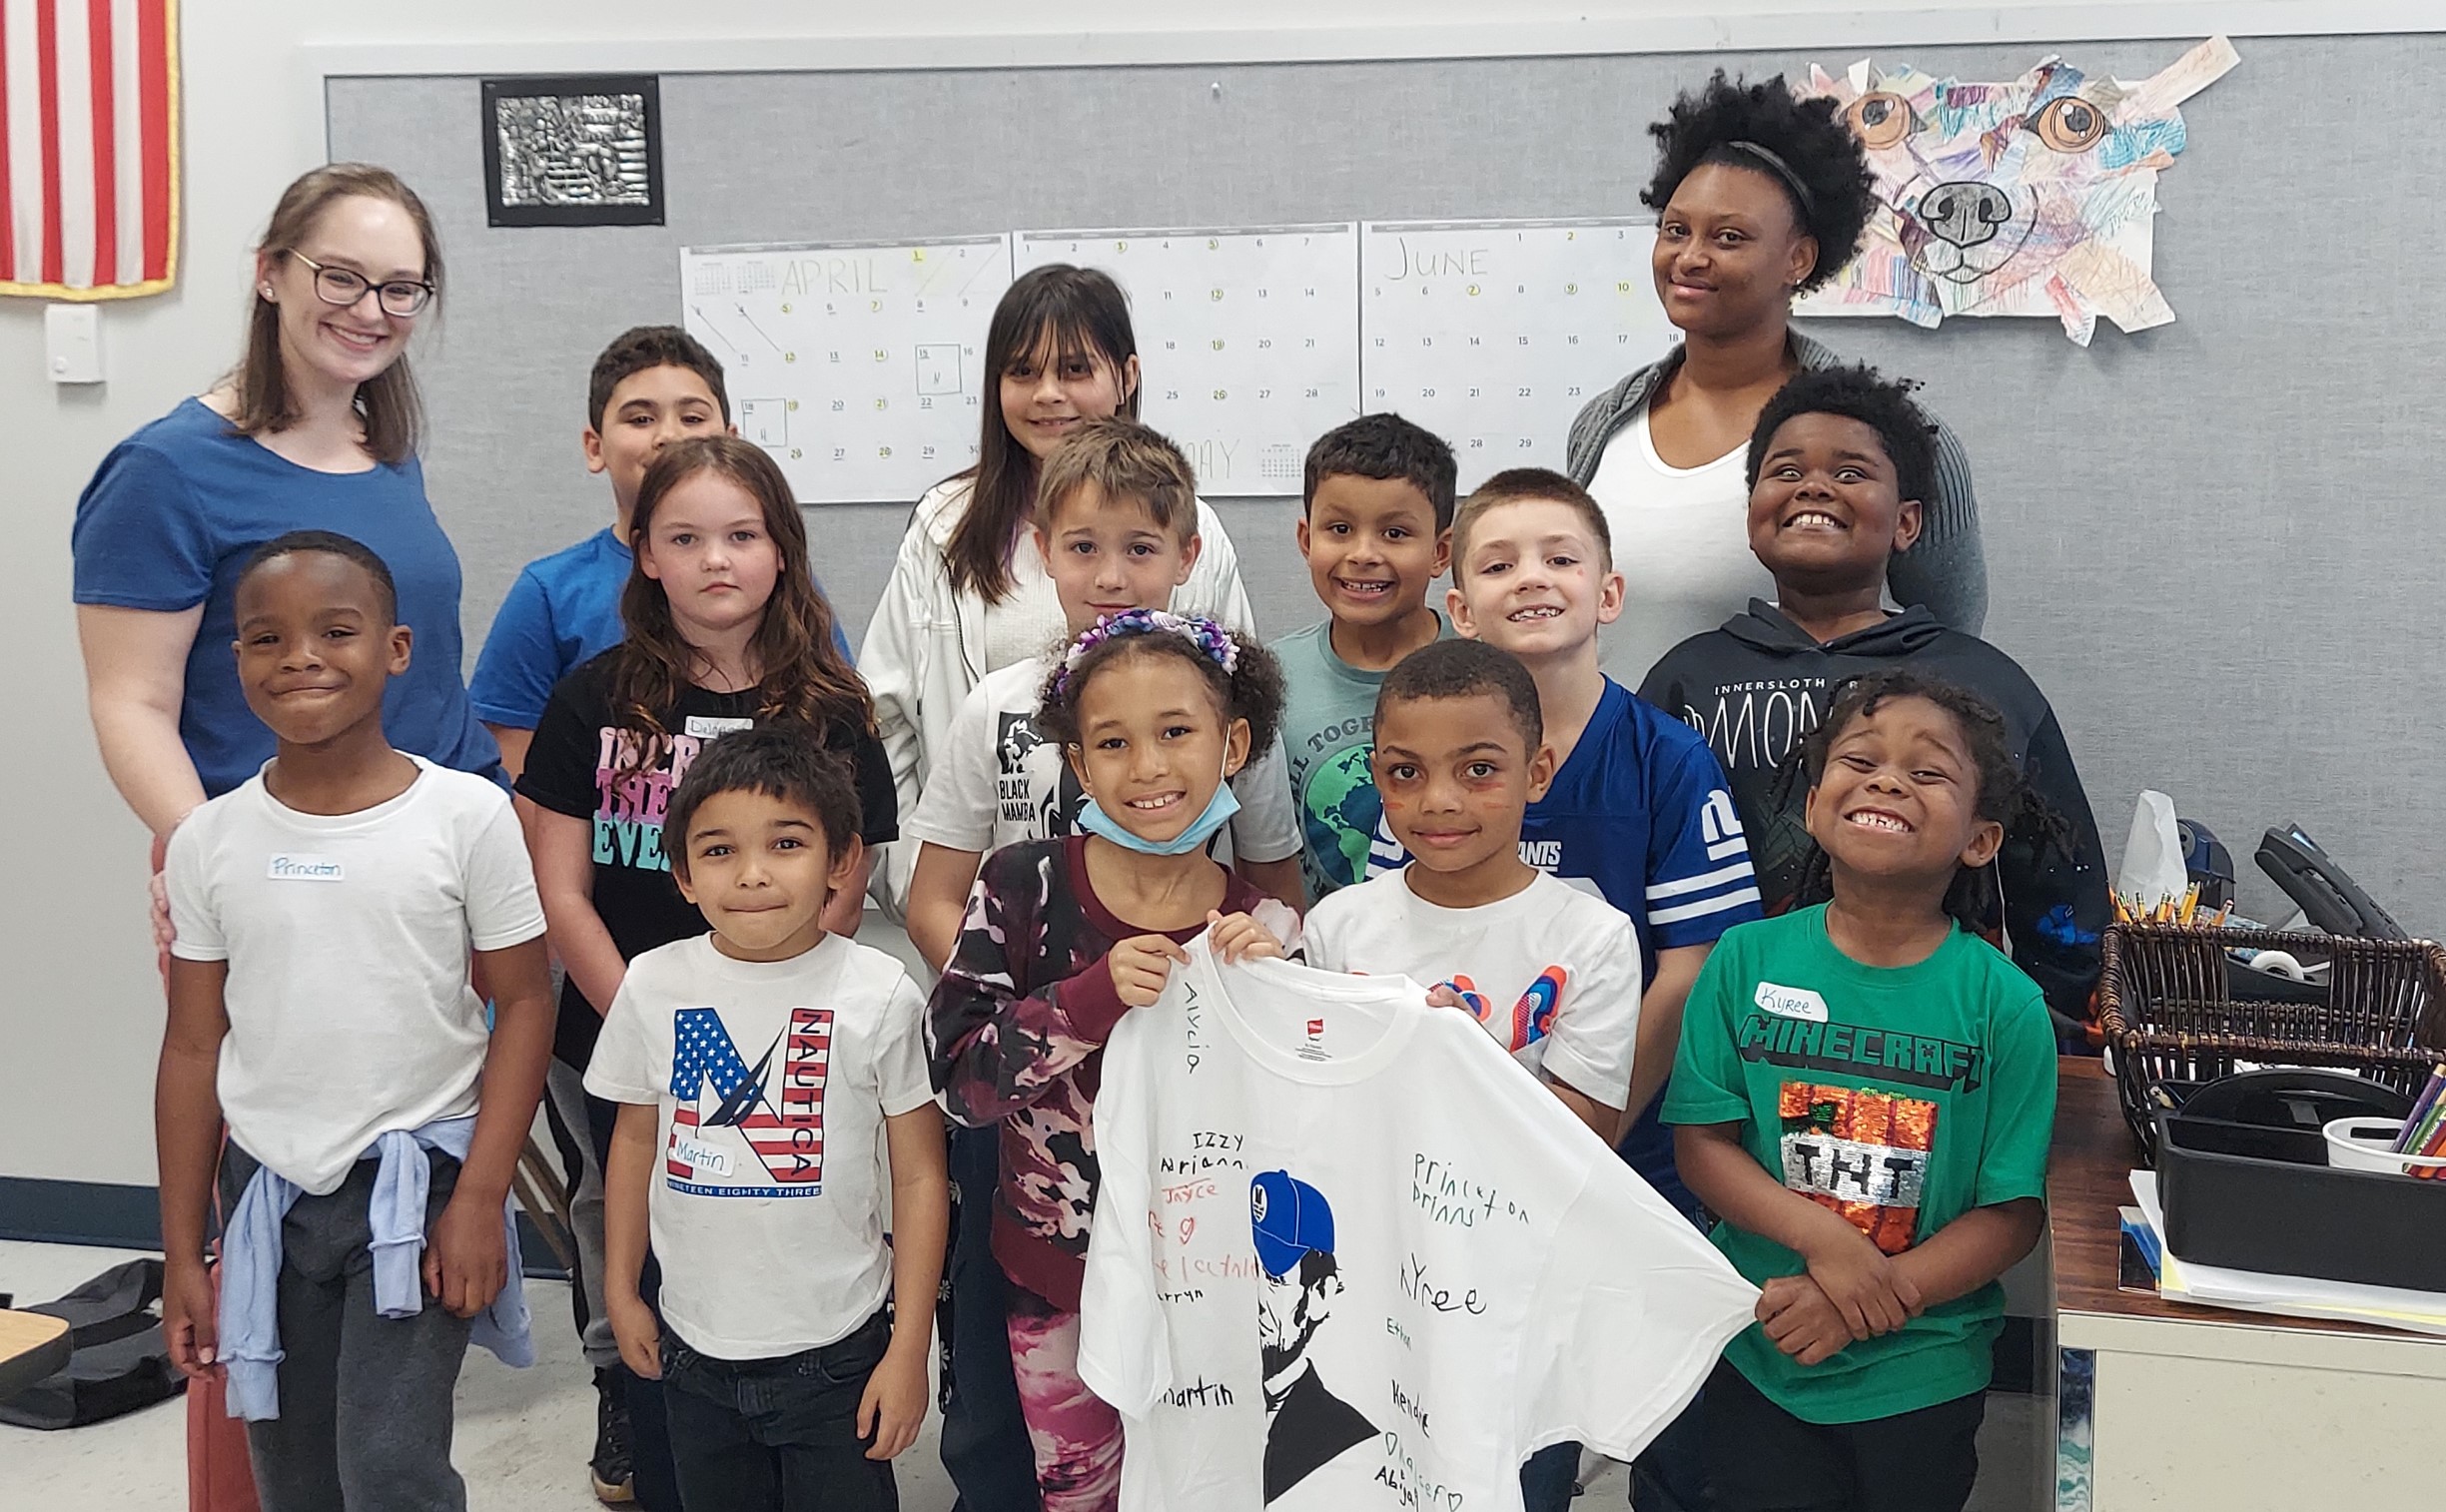 Students in the 21st Century Program at Wilcox Elementary holding up an LLCC T-shirt